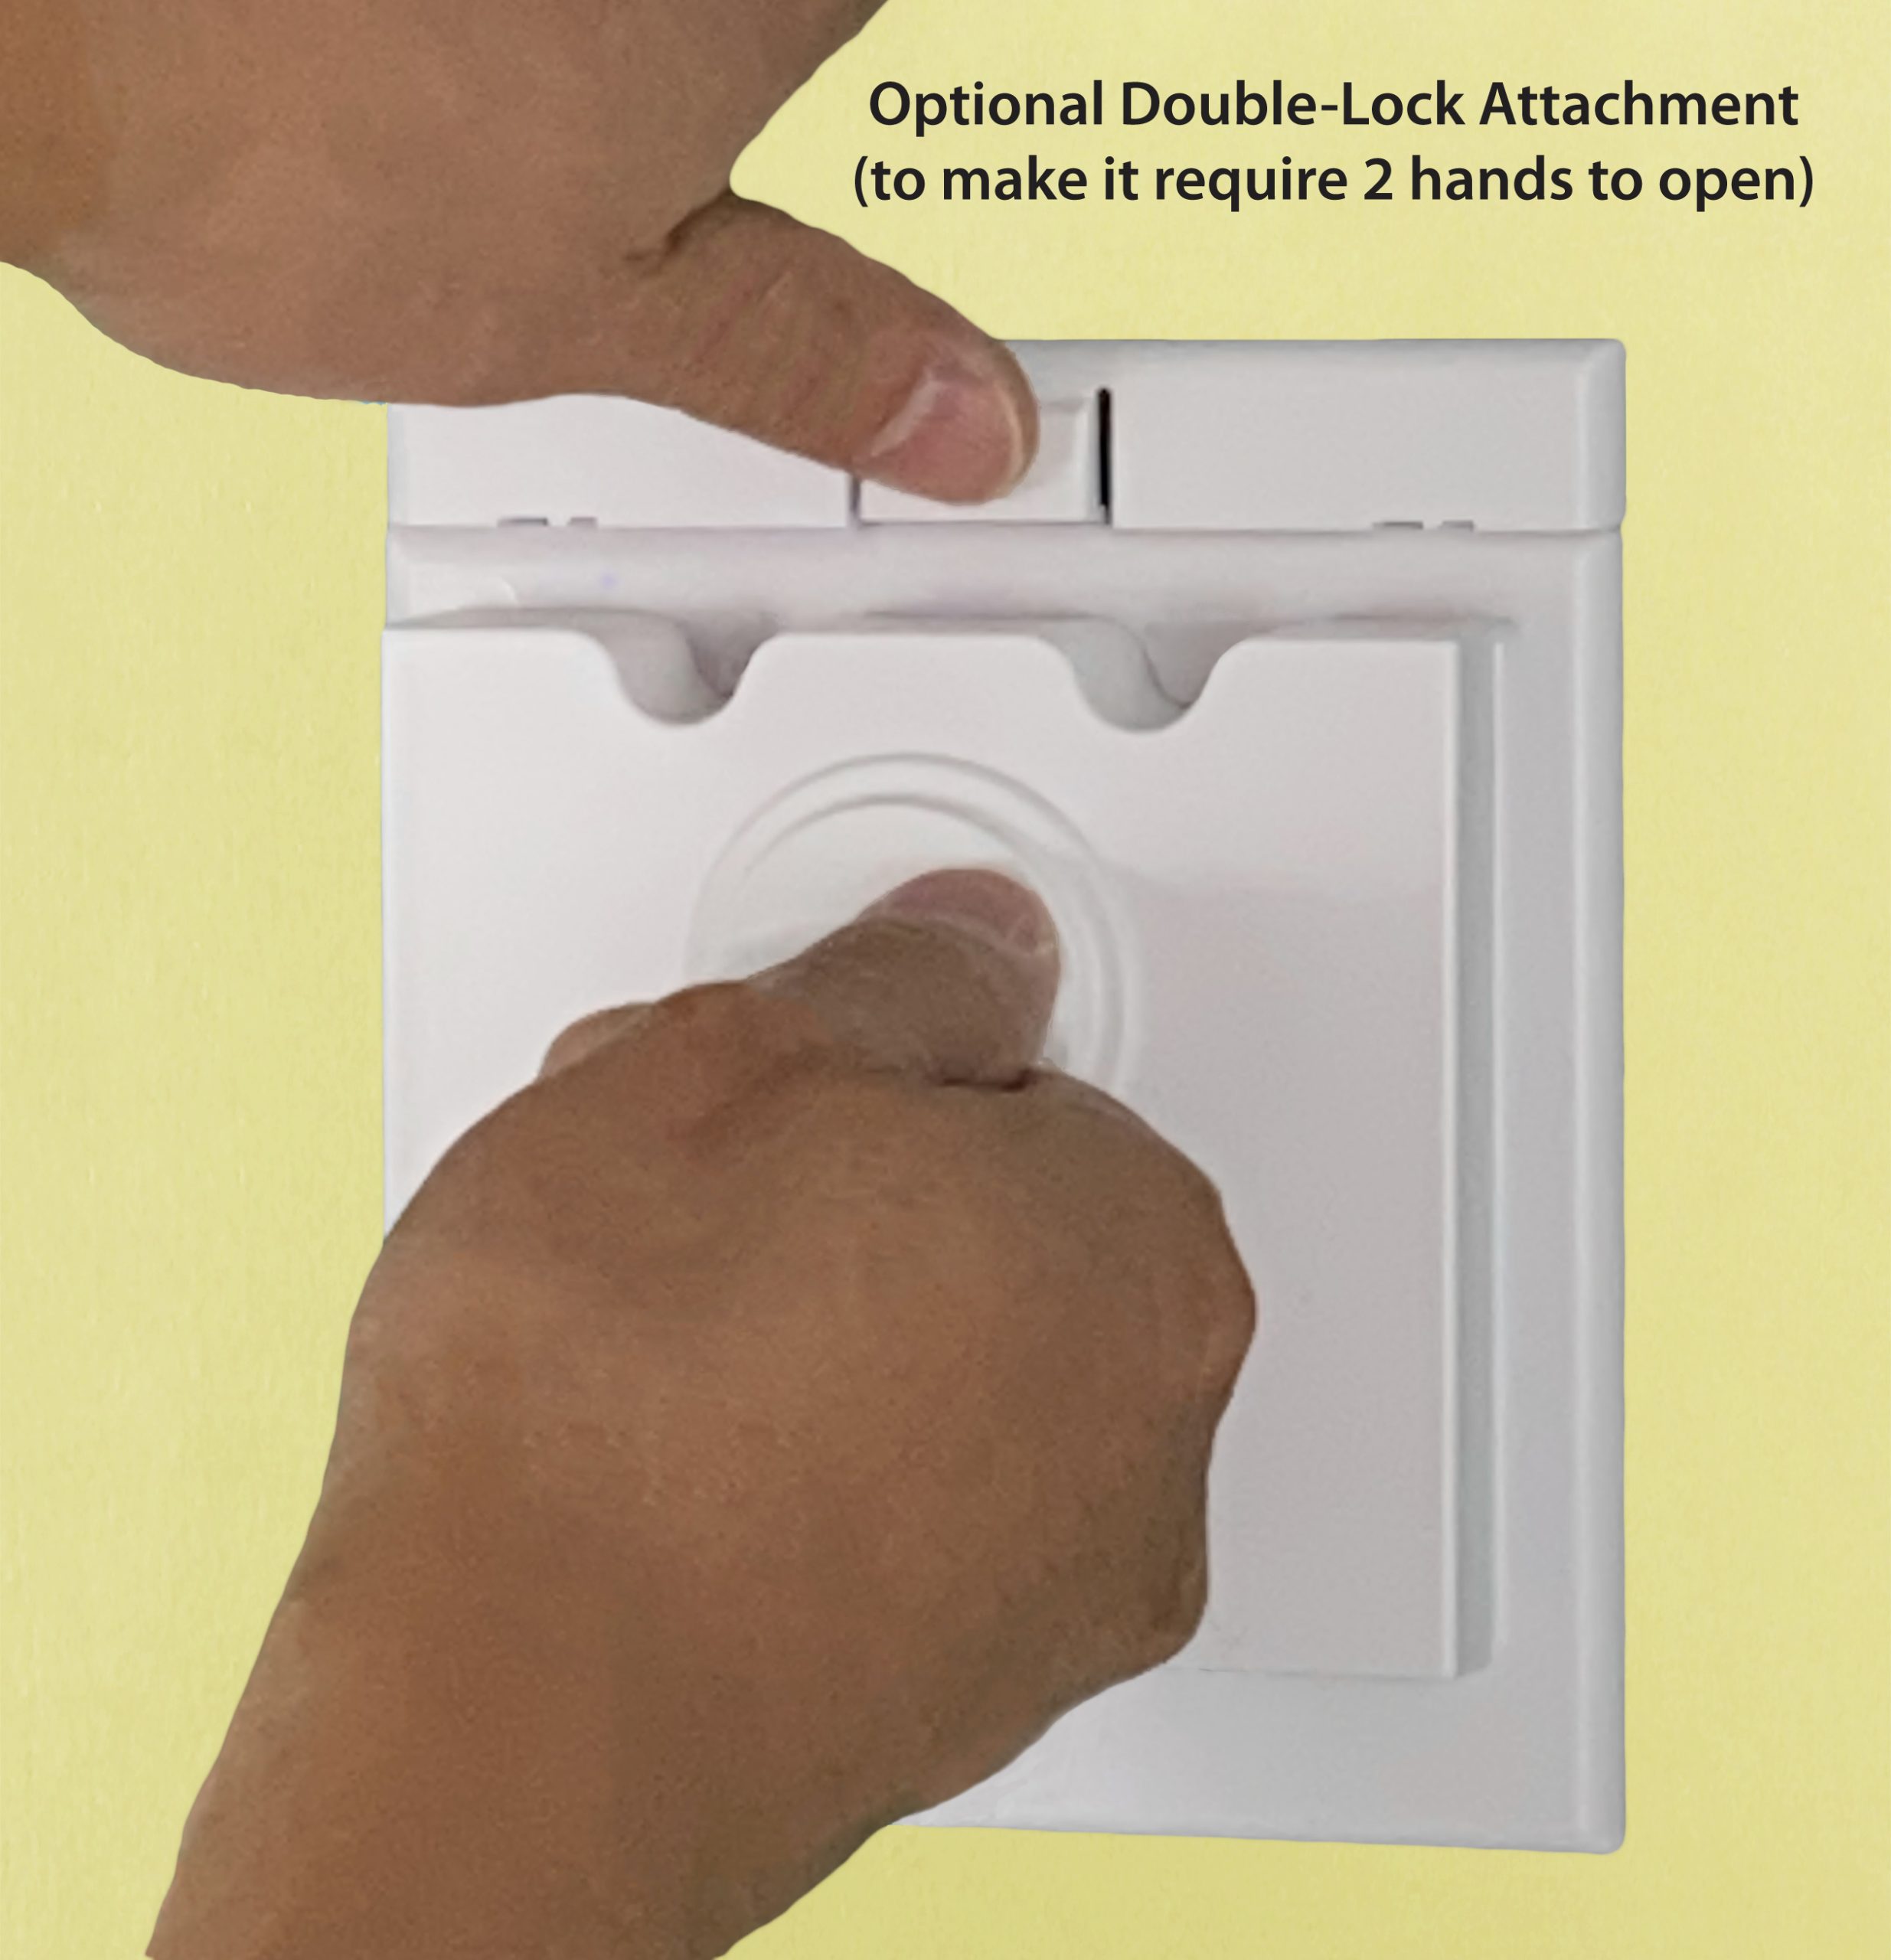 HomeStar Safety Light Switch Guard for Double Toggle Switches